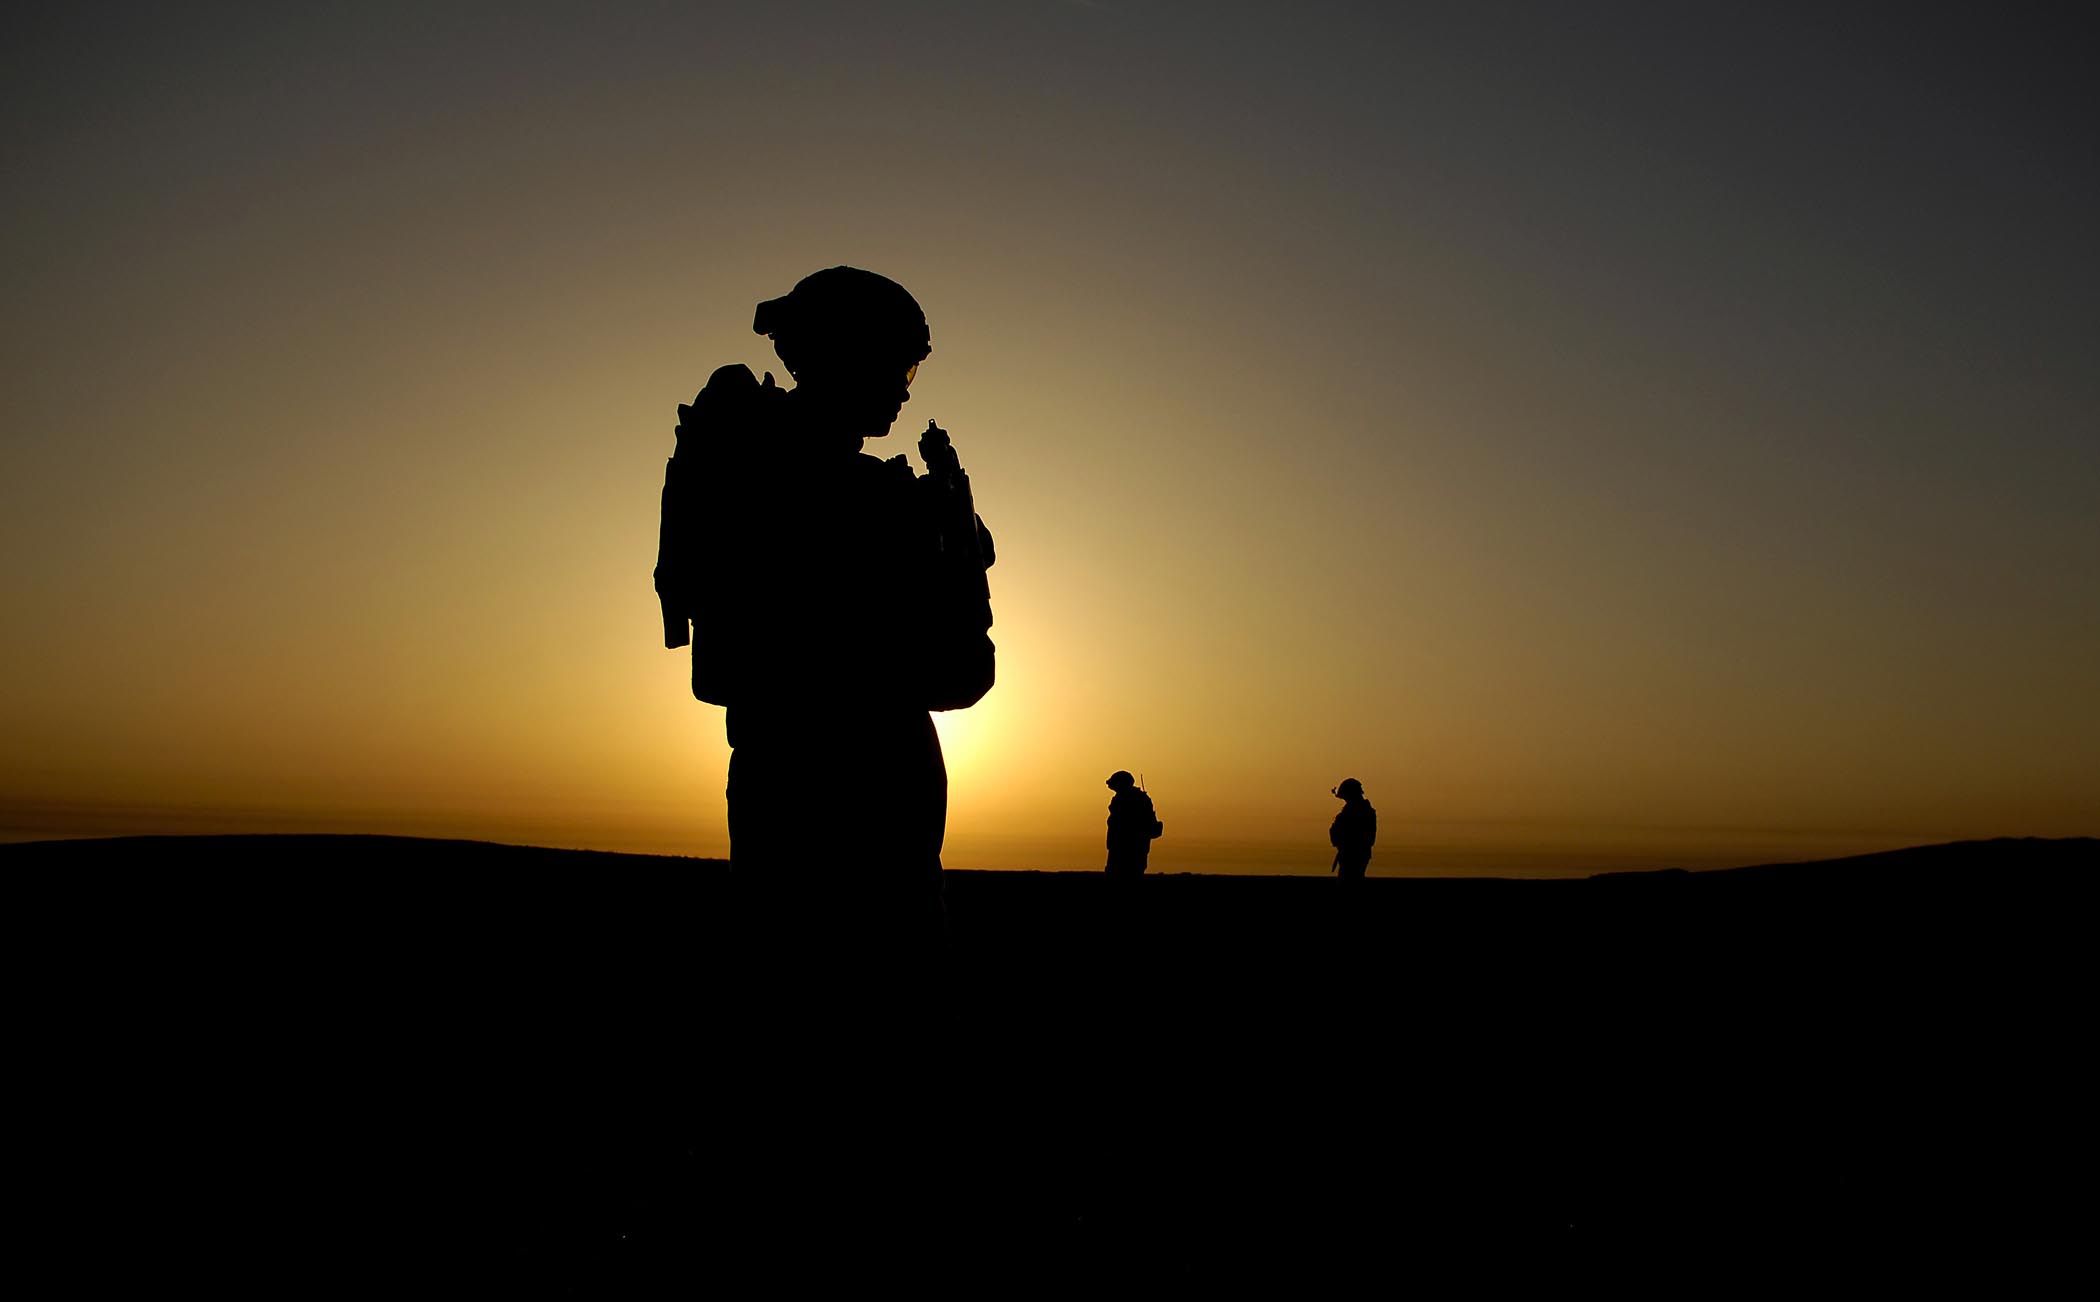 File:U.S. Army Soldier silhouette on mission in Iraq.jpg ...